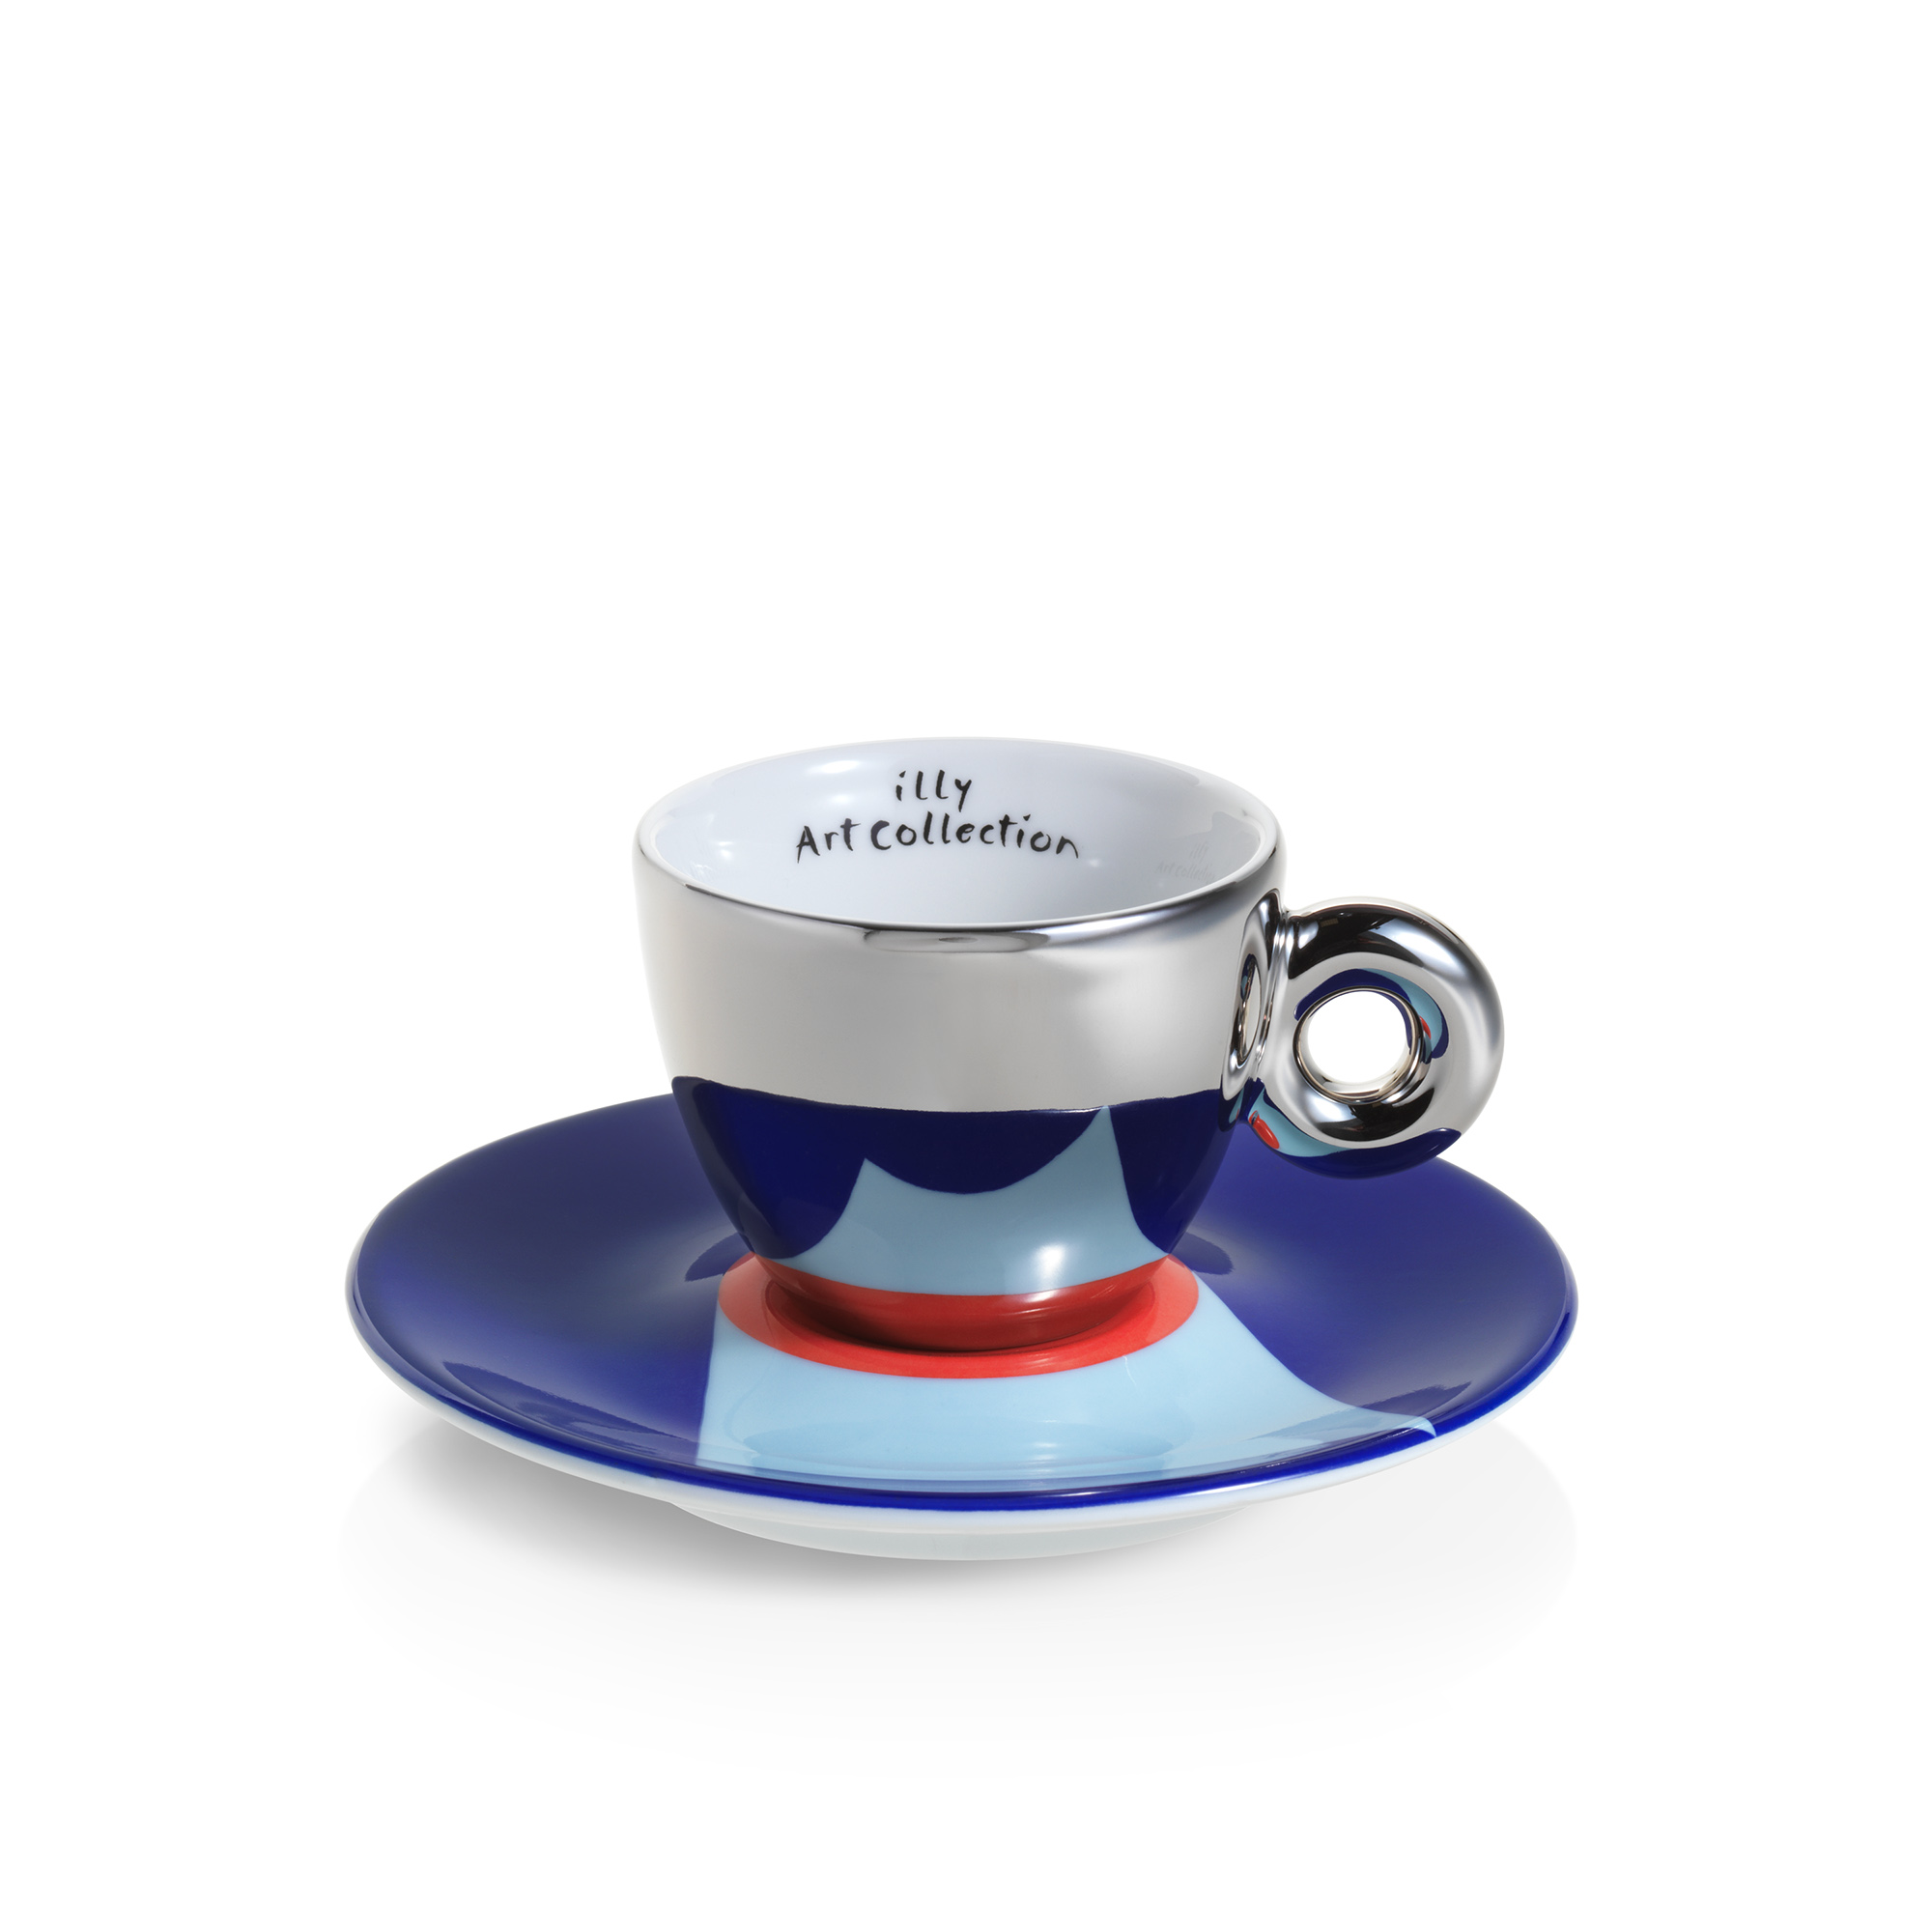 illy Art Collection STEFAN SAGMEISTER Gift Set 2 Espresso Cups, Cups, 02-02-6060